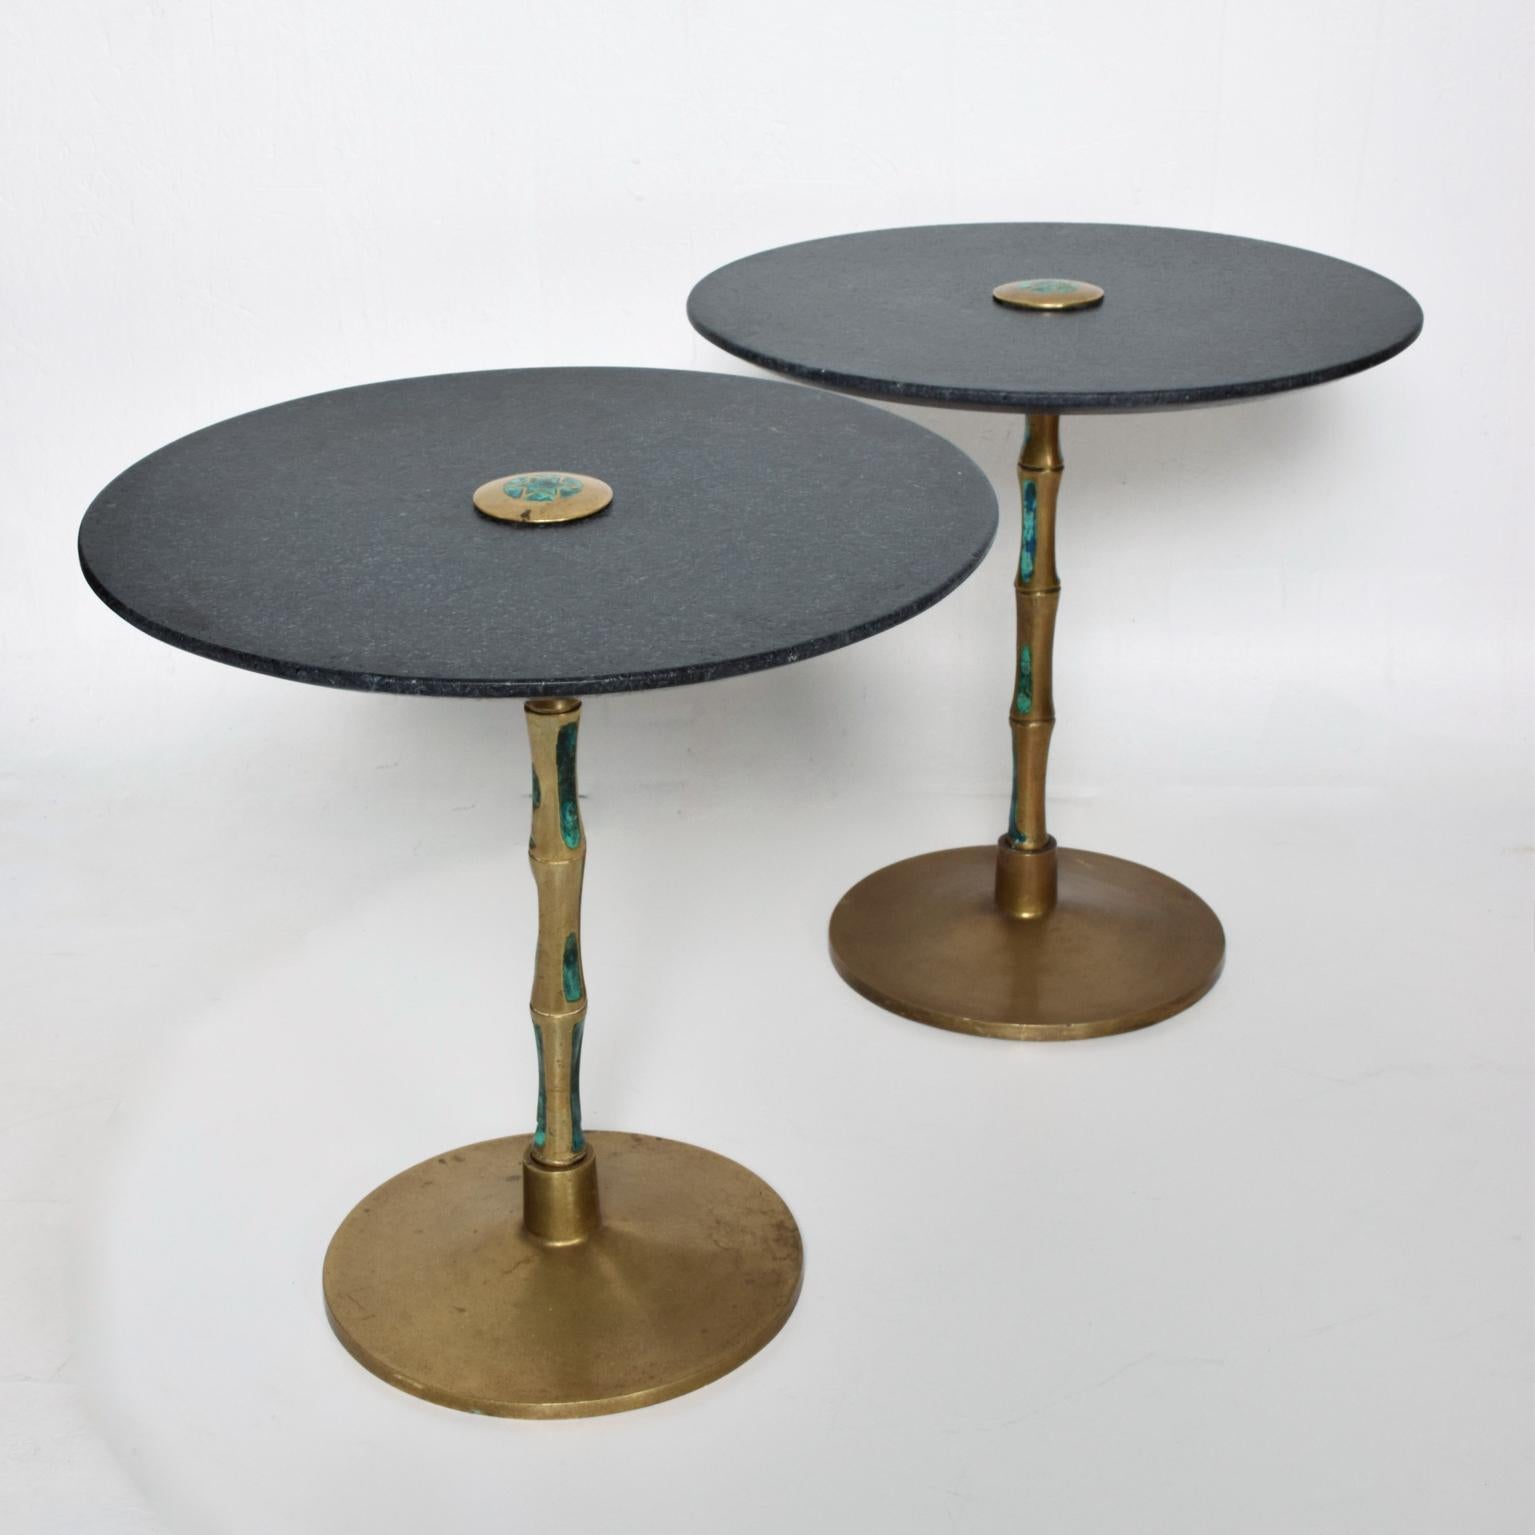 Patinated Pepe Mendoza, Pair of Side Tables, Midcentury Mexican Modernist